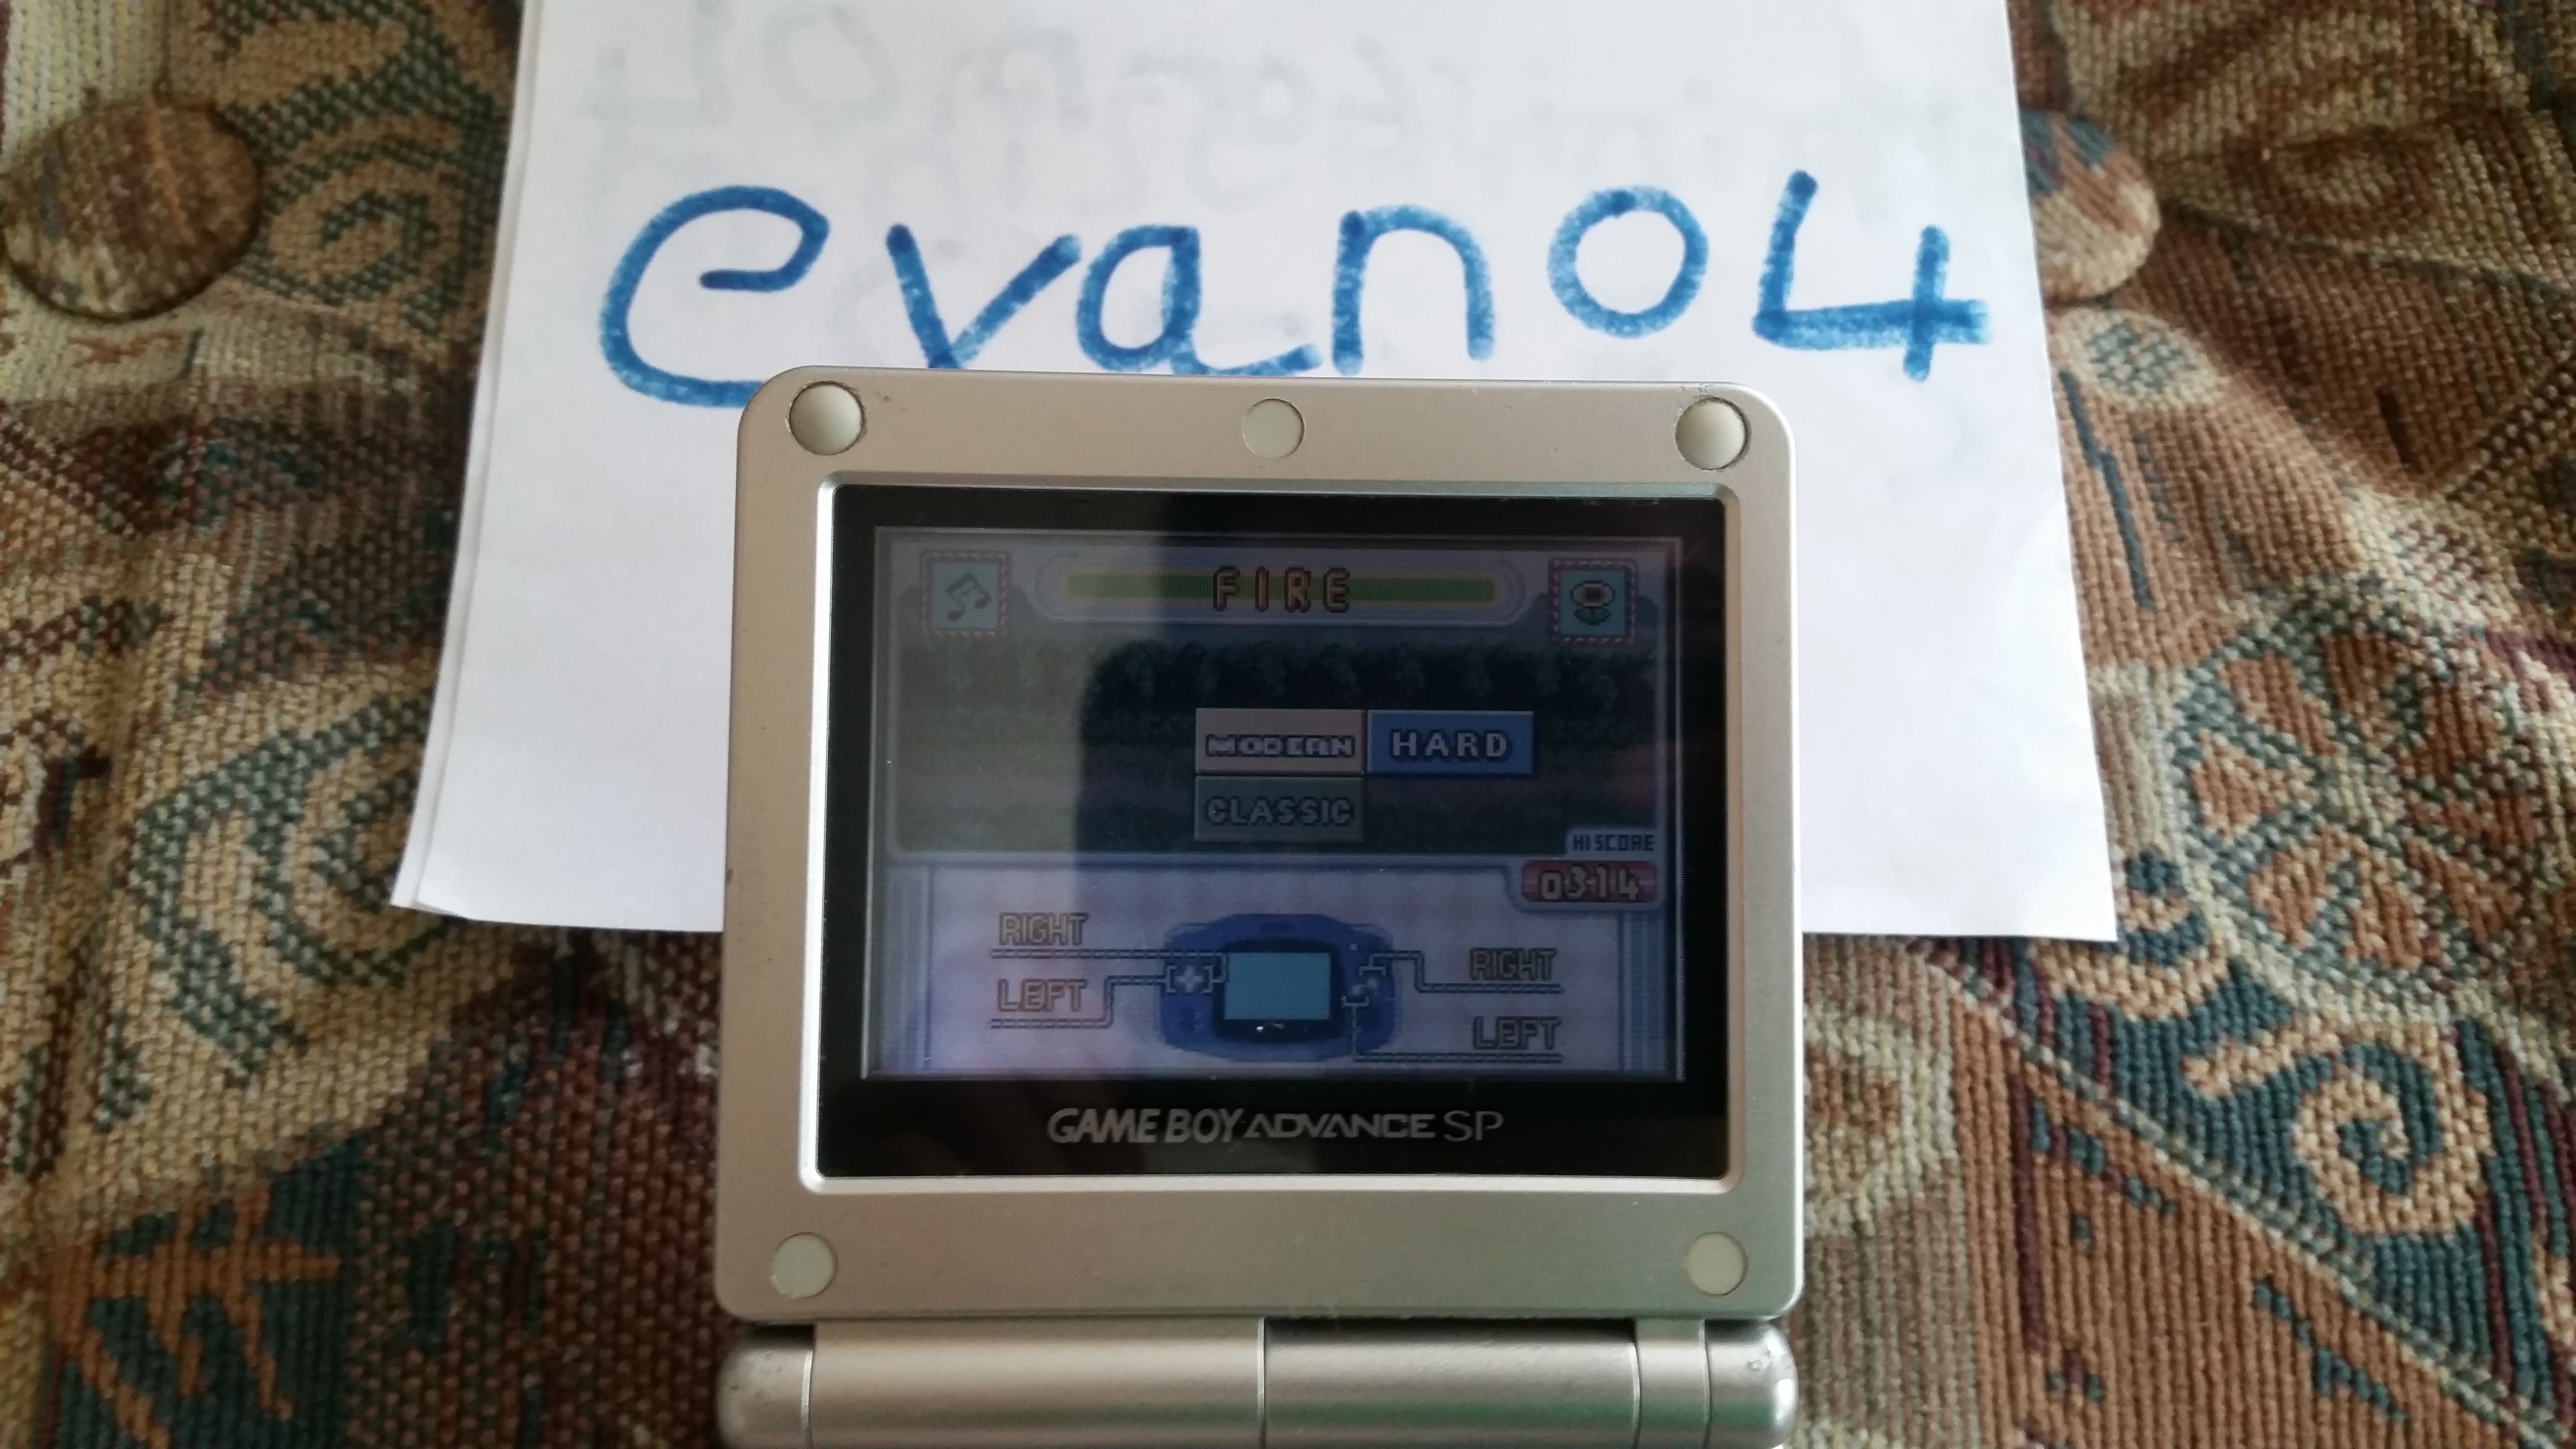 evan04: Game & Watch Gallery 4: Fire [Modern: Hard] (GBA) 314 points on 2019-07-28 05:42:11